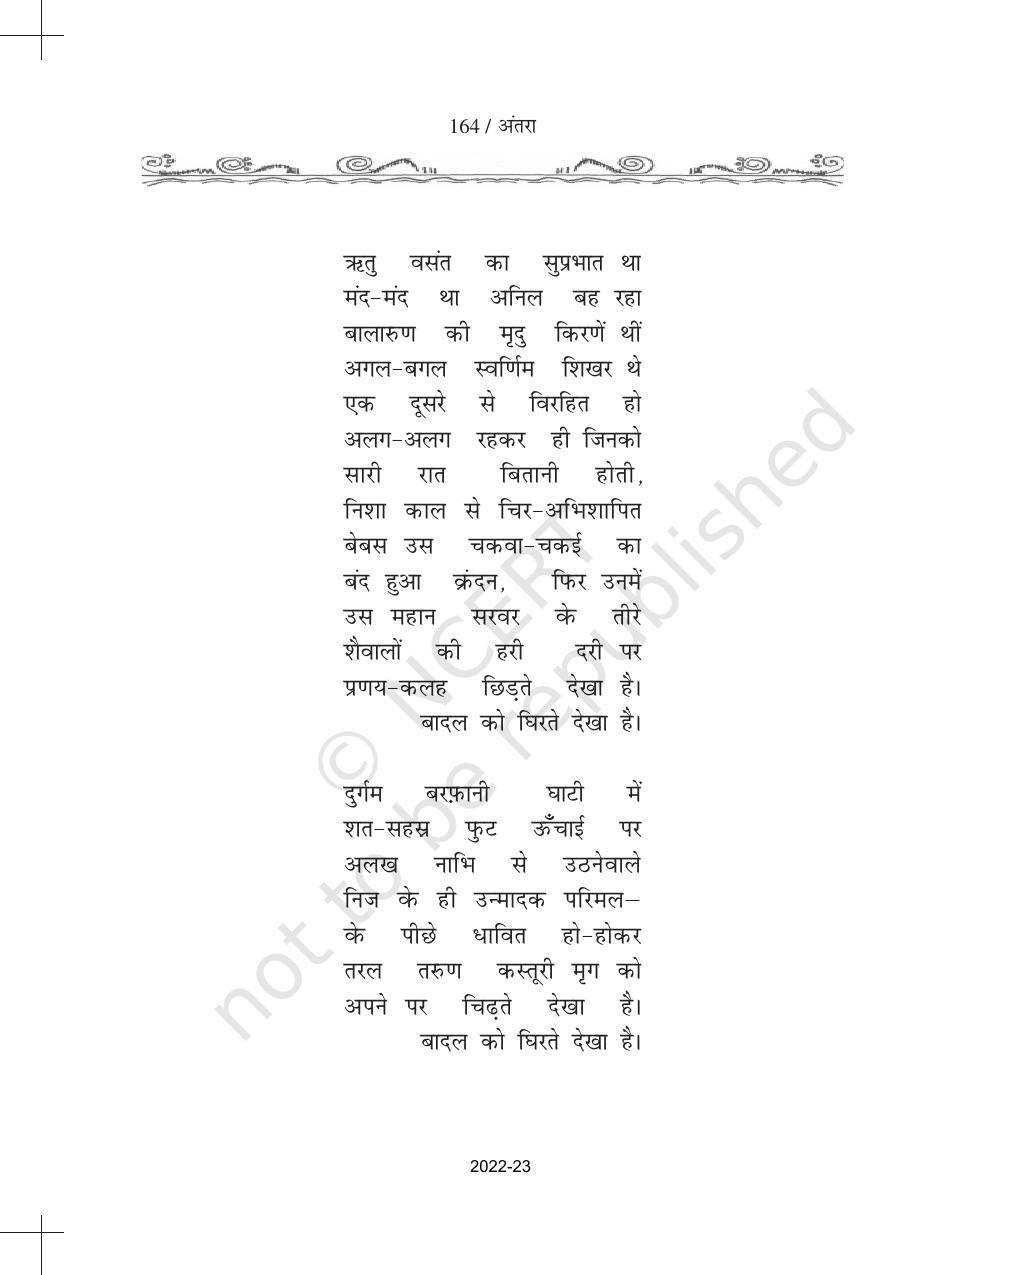 NCERT Book for Class 11 Hindi Antra Chapter 17 नागार्जुन - Page 4